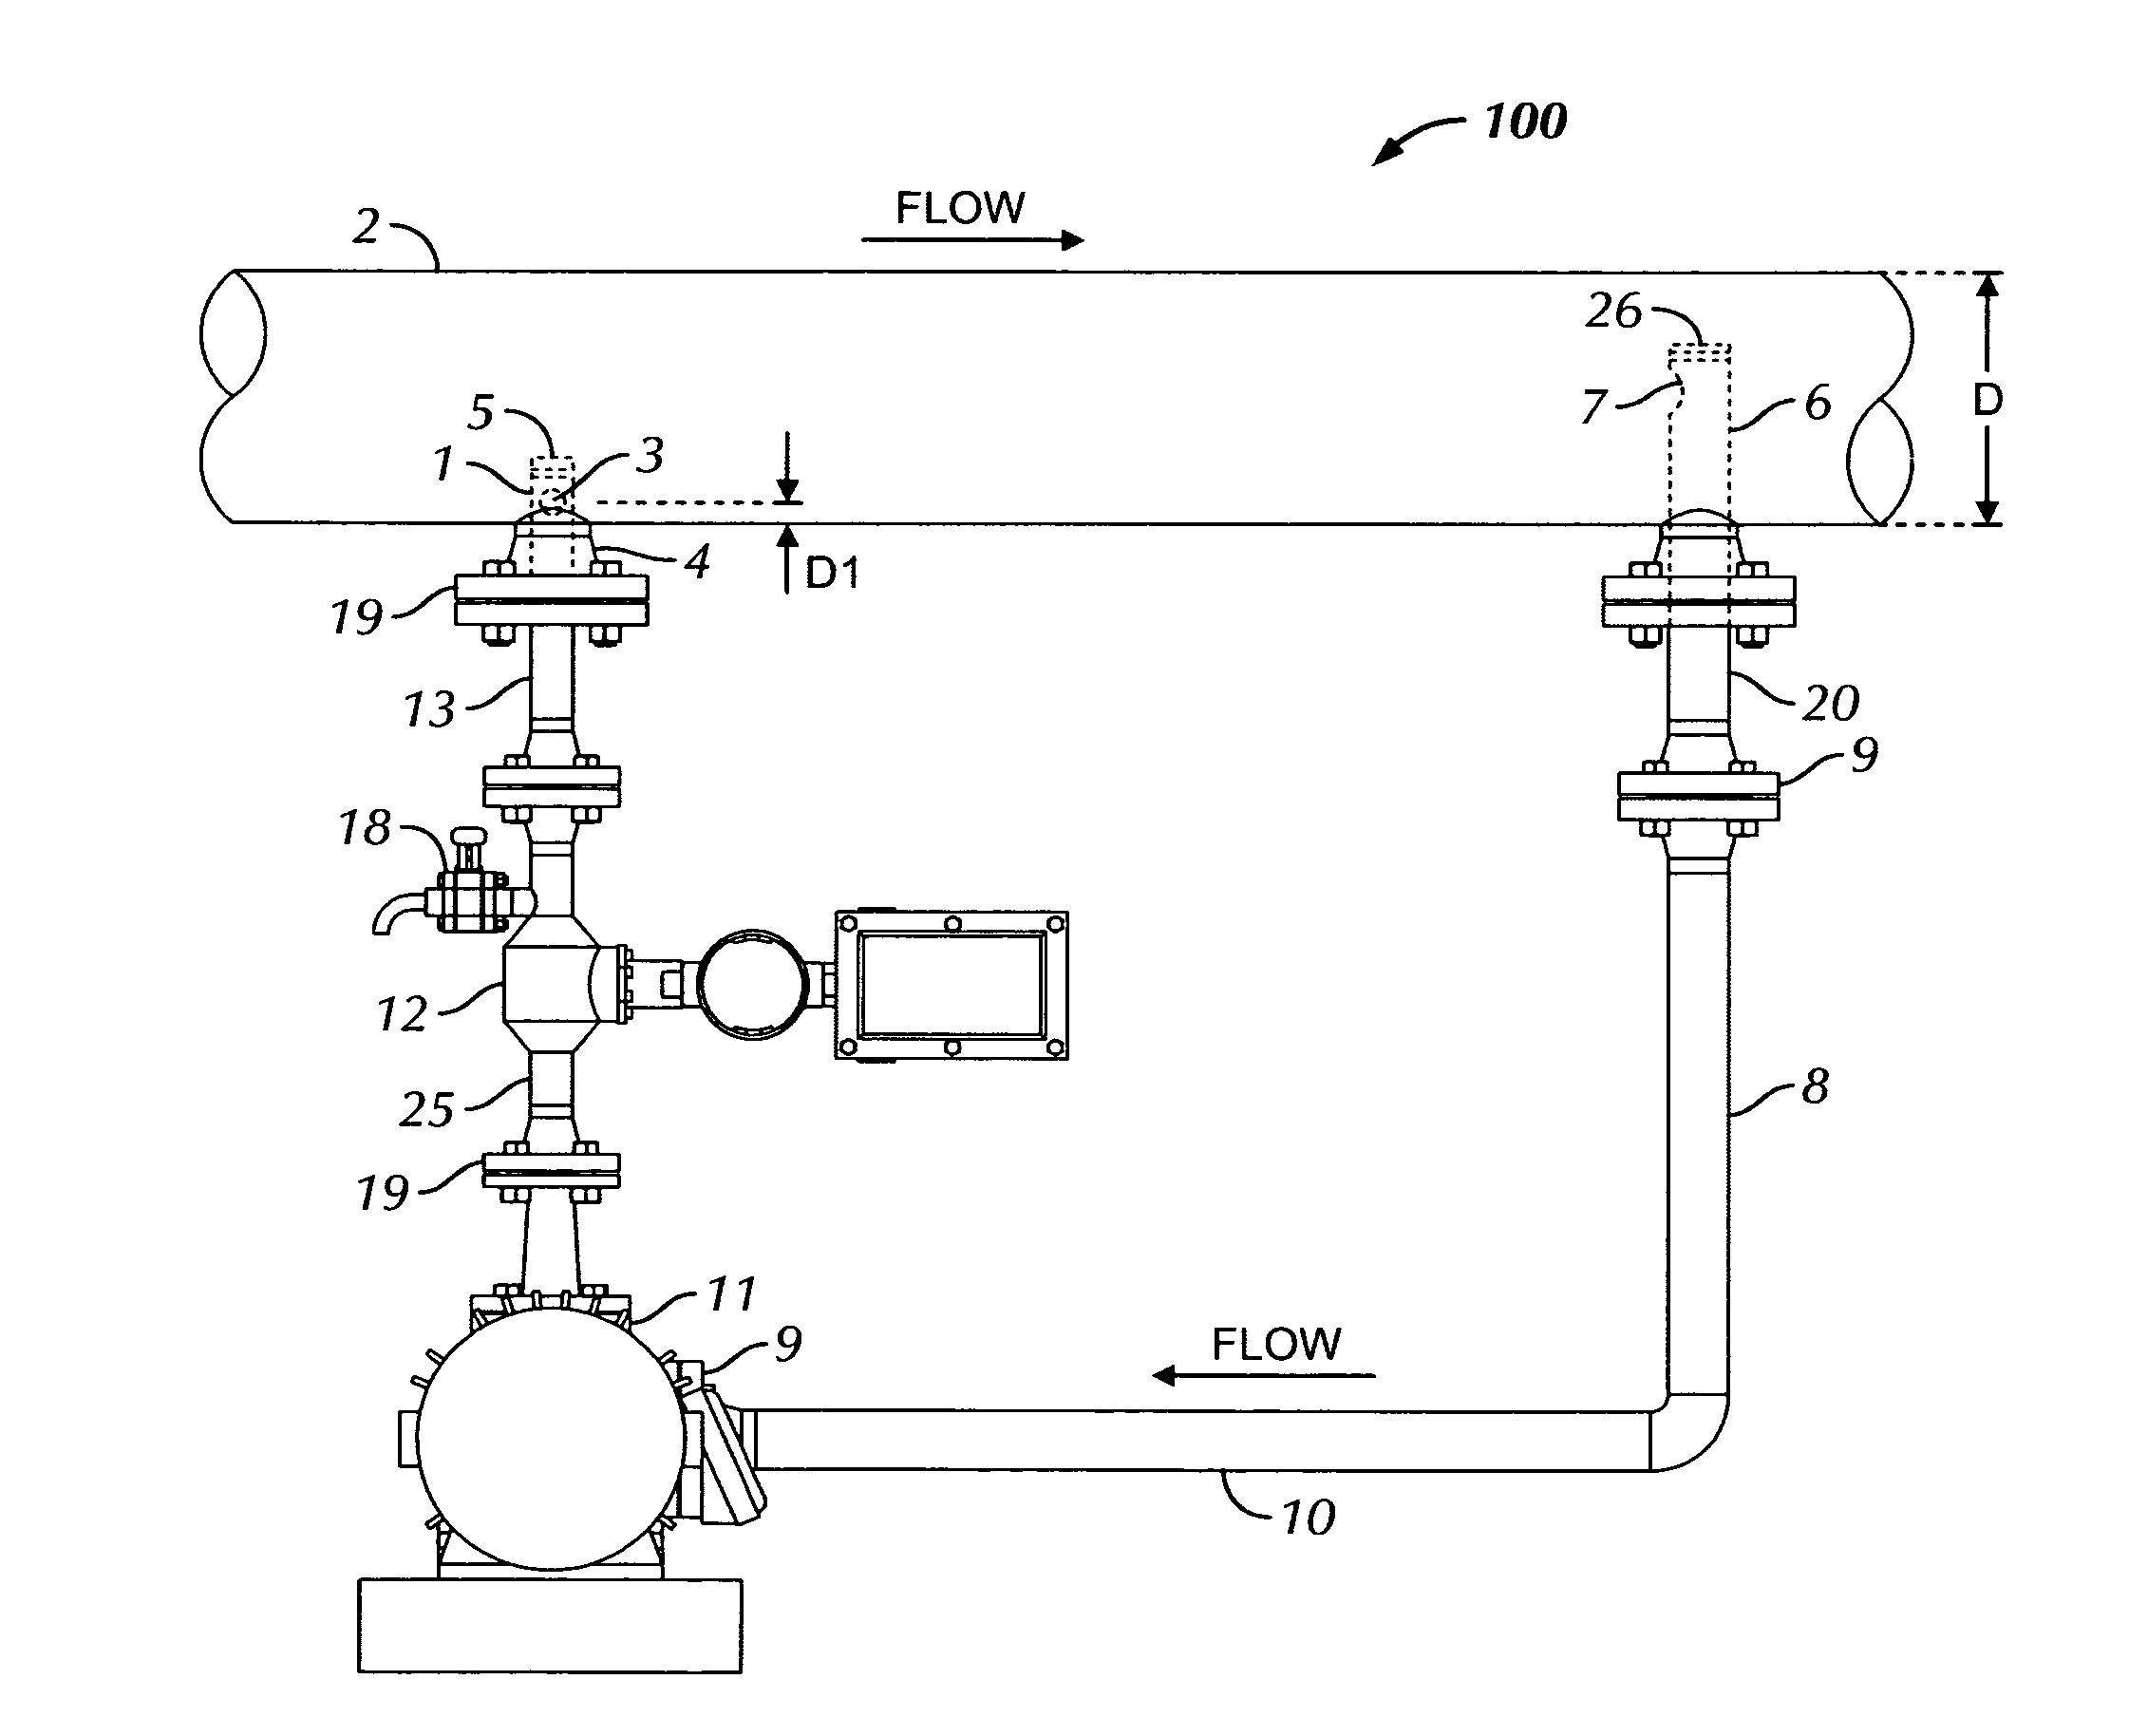 Apparatus and method for maintaining consistent fluid velocity and homogeneity in a pipeline